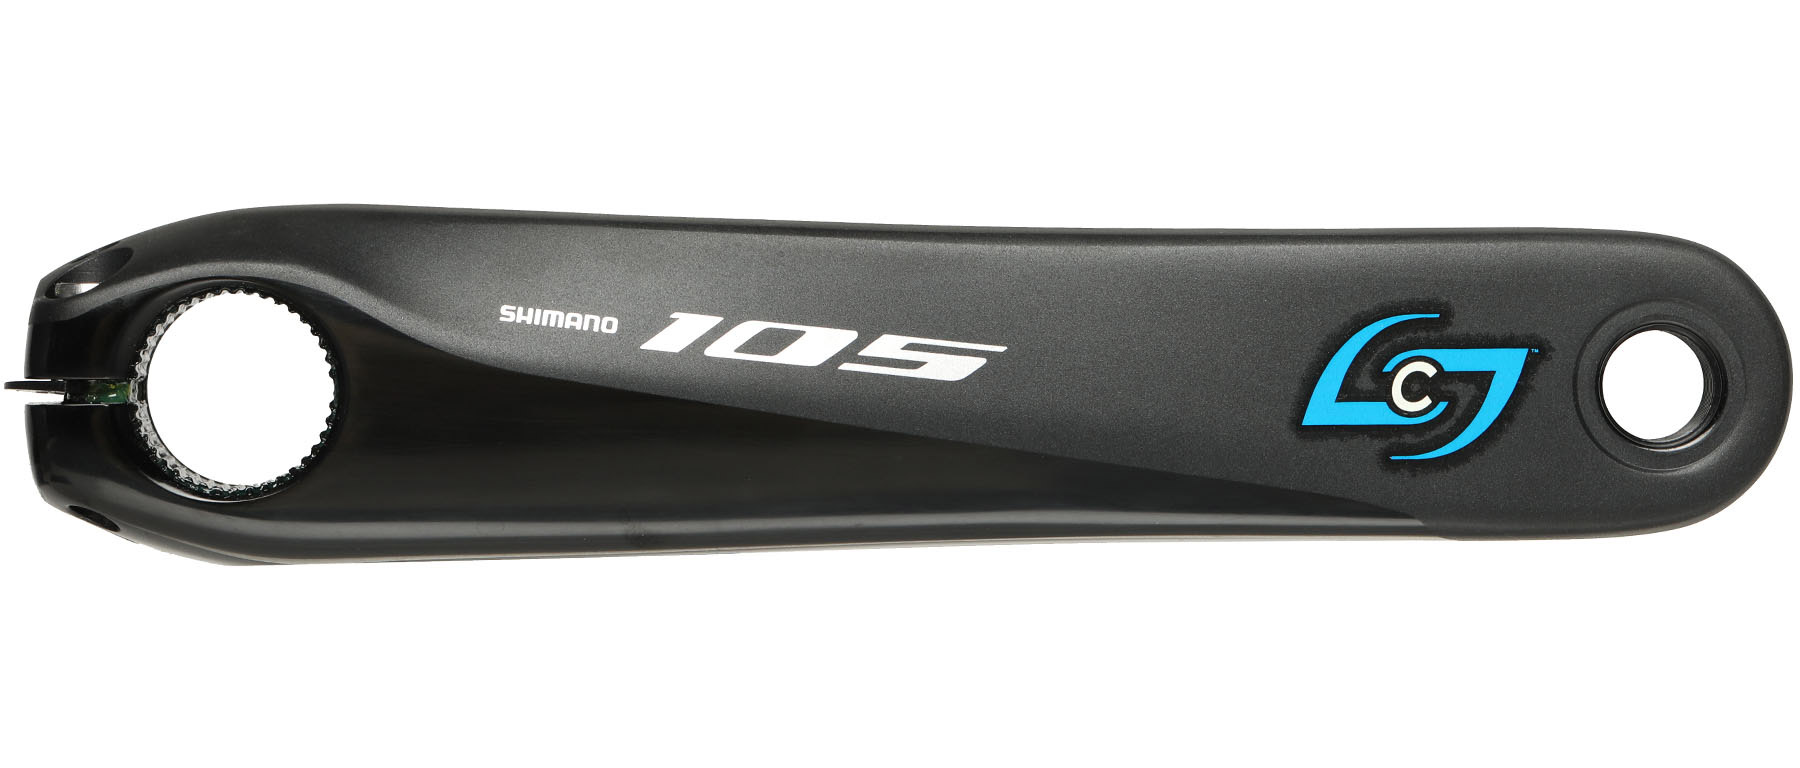 Stages Power Meter Shimano 105 5800 175mm Rev 2 for sale online 